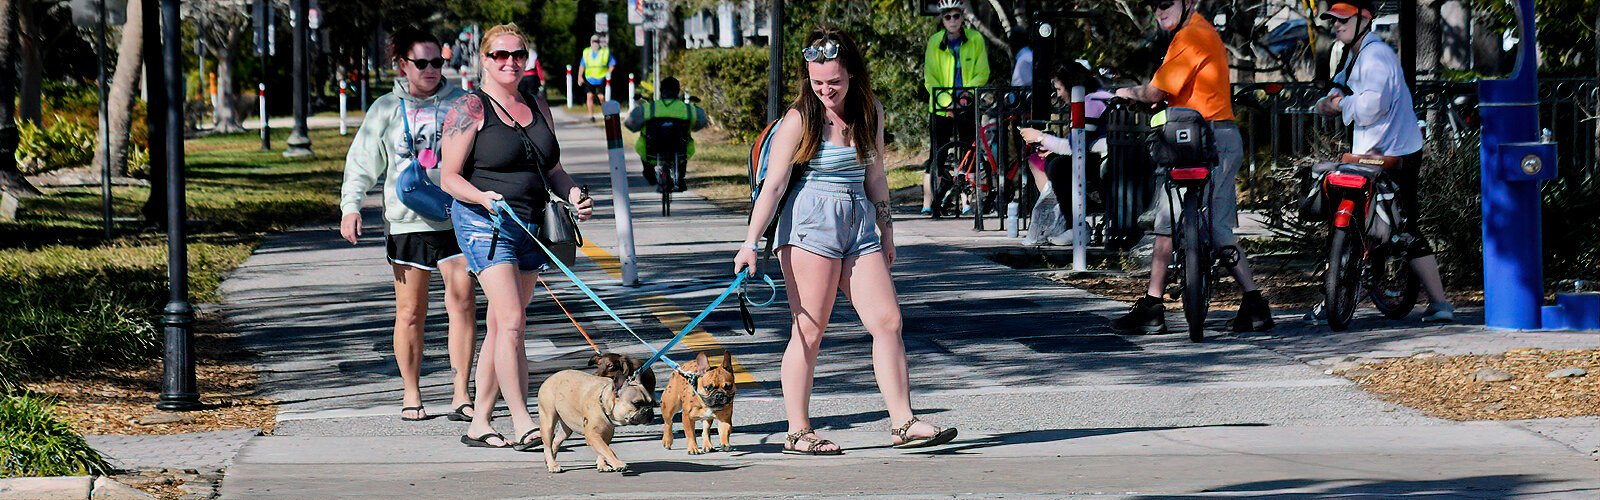  Capturing people’s attention, a lively trio of pooches enjoys a sunny walk in dog-friendly Dunedin.